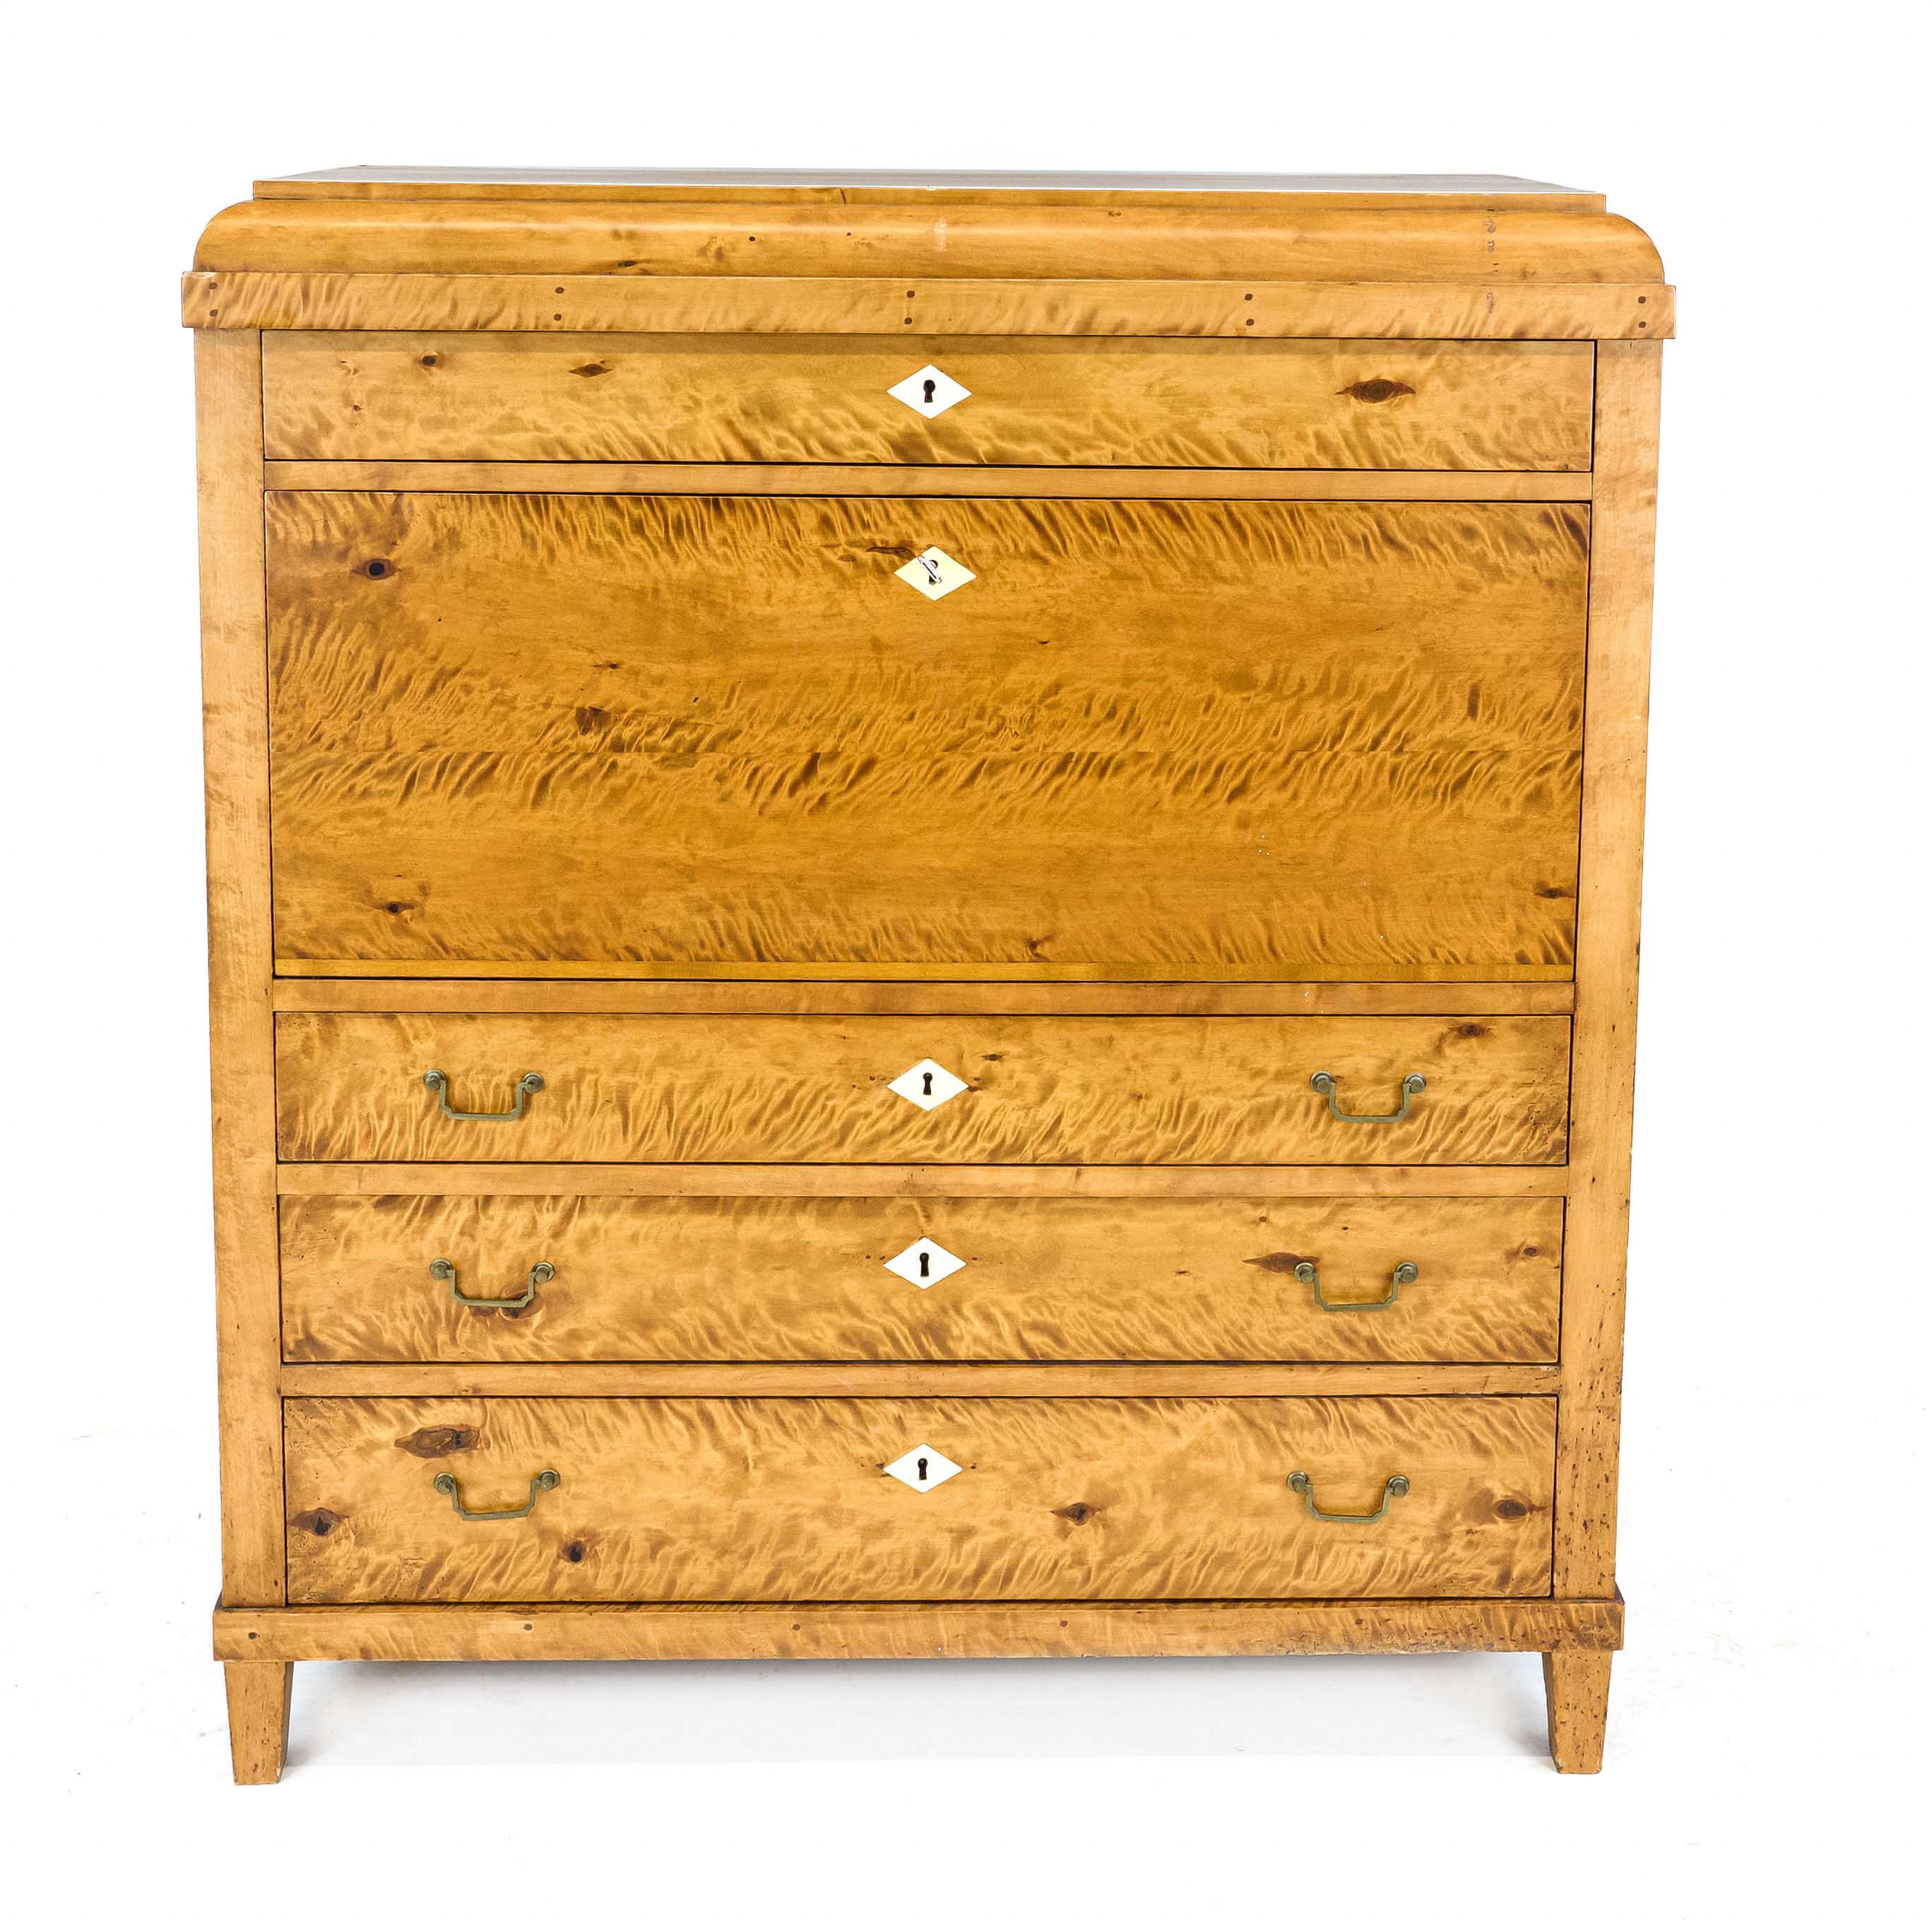 Biedermeier standing secretary, 19th century, flamed birch, straight body with four drawers, - Image 2 of 2